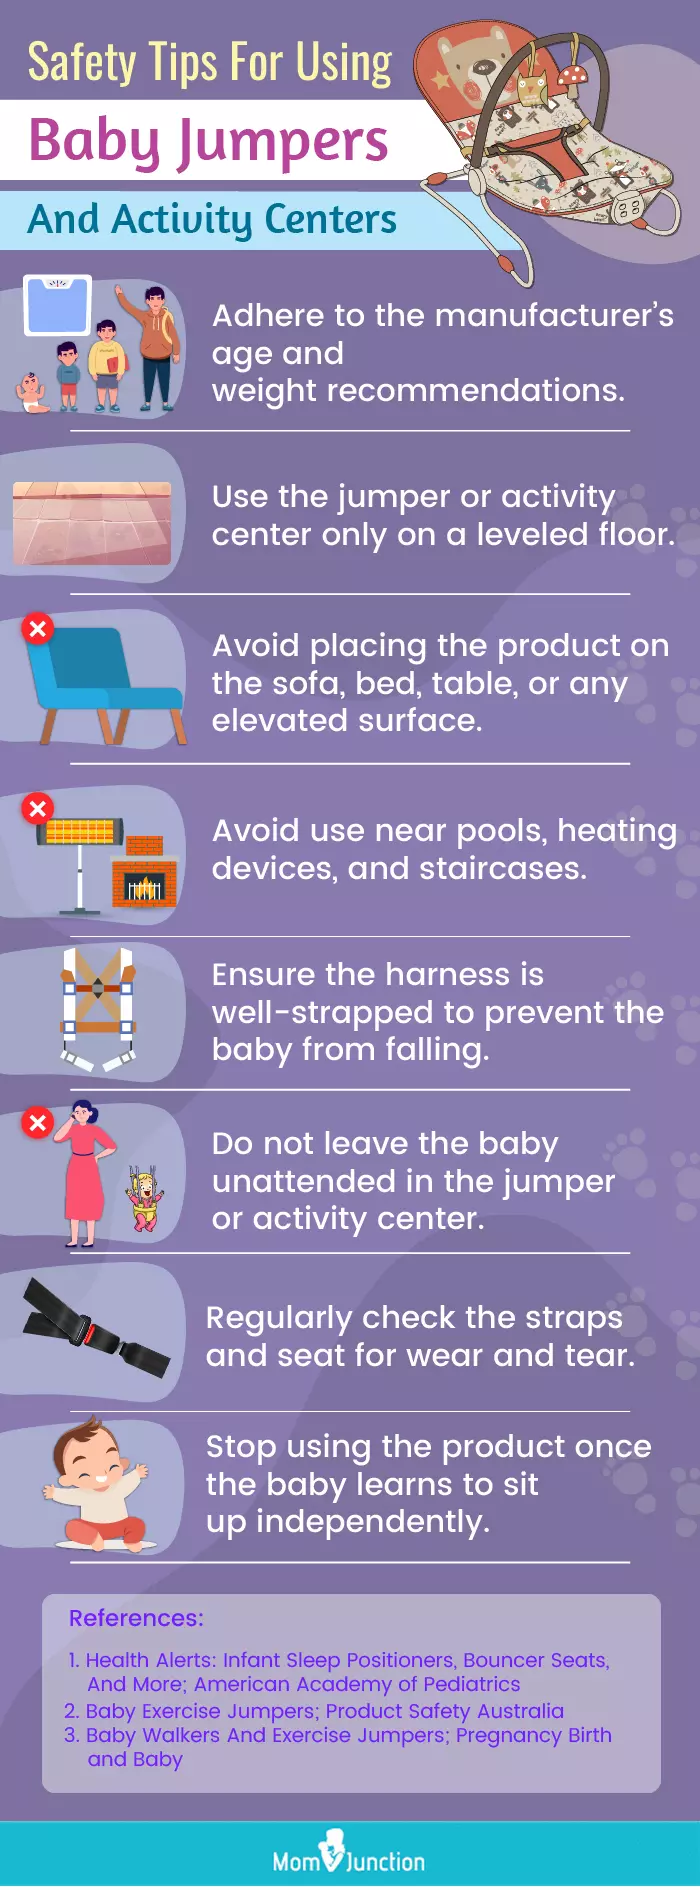 Safety Tips For Using Baby Jumpers And Activity Centers (infographic)